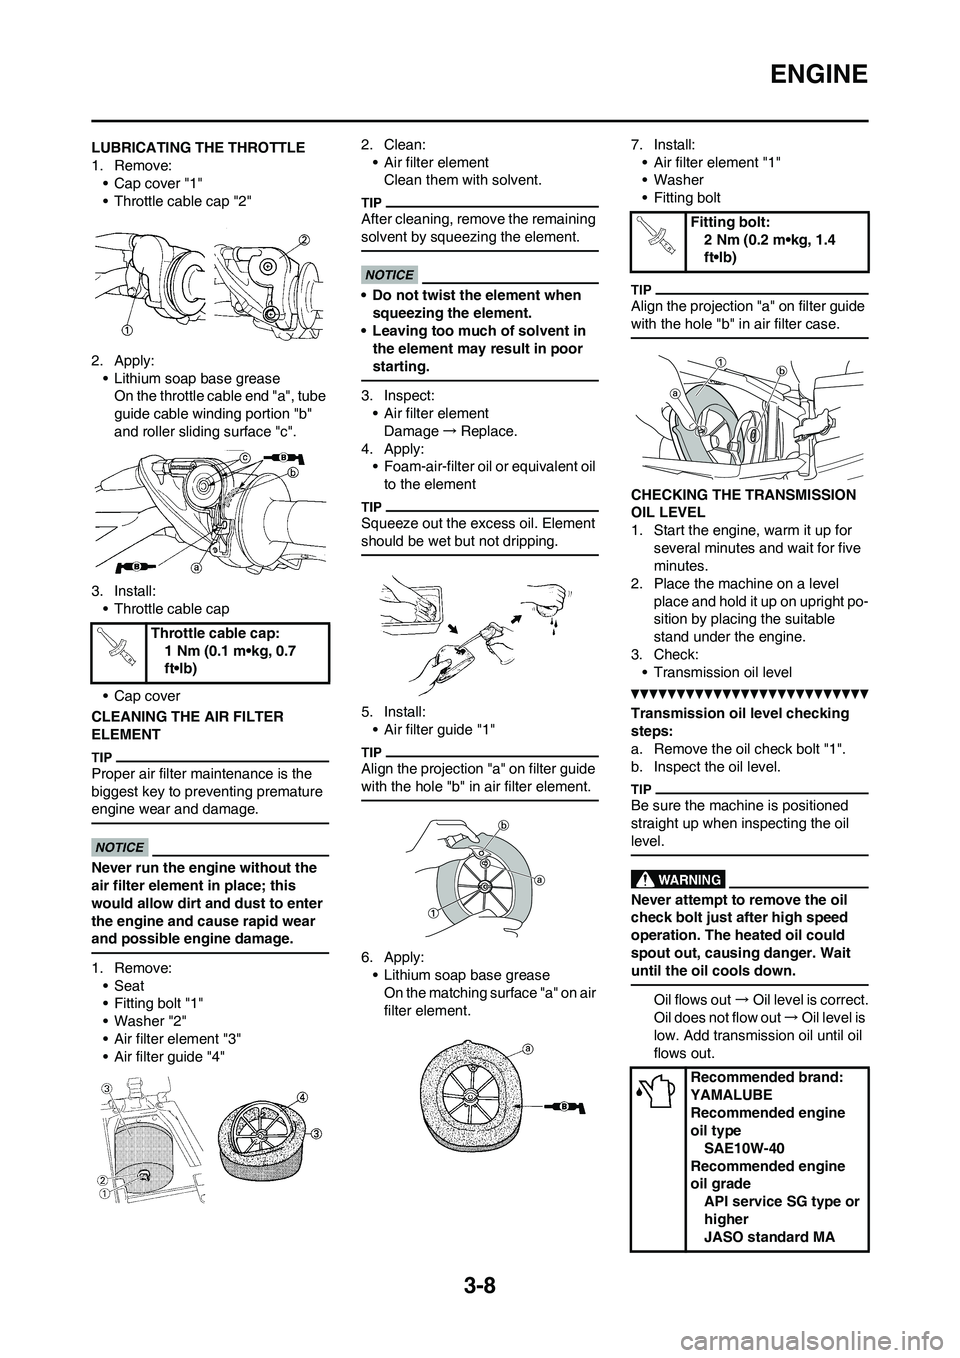 YAMAHA YZ125LC 2010  Owners Manual 3-8
ENGINE
LUBRICATING THE THROTTLE
1. Remove:
• Cap cover "1"
• Throttle cable cap "2"
2. Apply:
• Lithium soap base grease
On the throttle cable end "a", tube 
guide cable winding portion "b" 